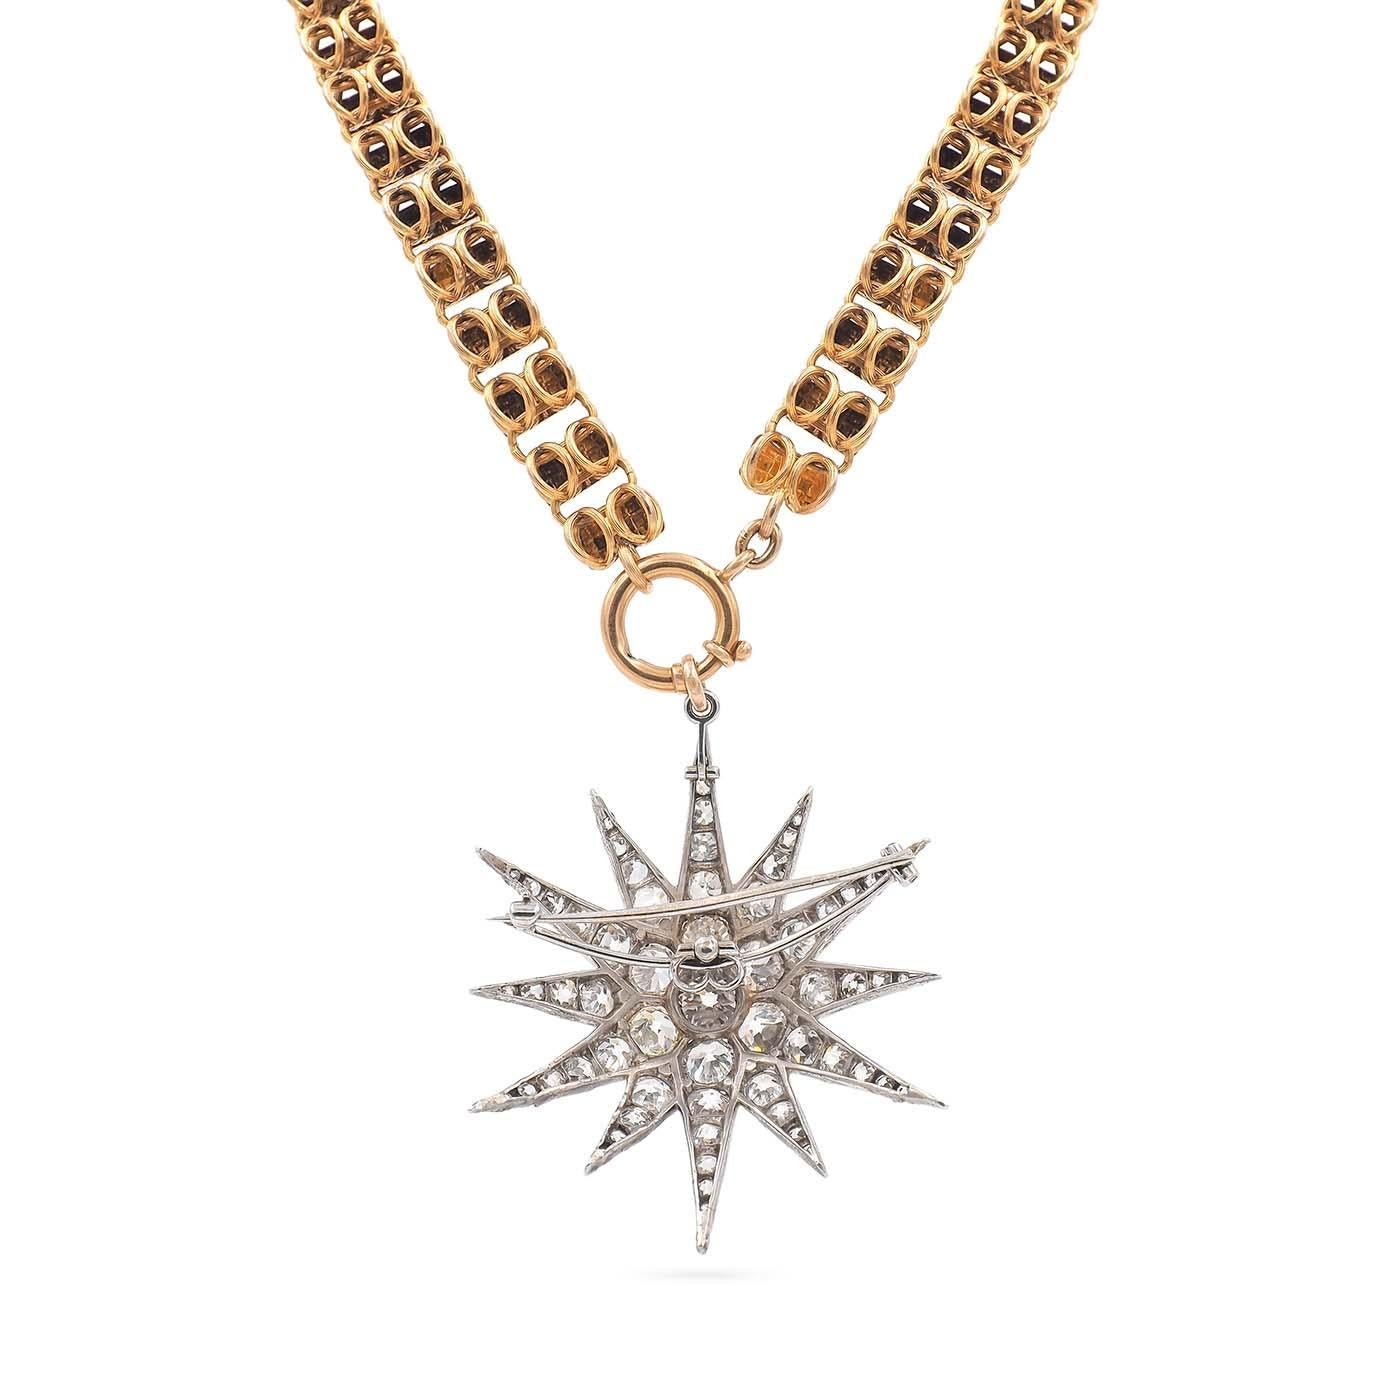 A magnificent Mid-Victorian Era 15.26 Carat Total Weight Old Cut Diamond Starburst Pin/Pendant composed of Silver. The Starburst pendant can also be worn as a brooch. The bail is retractable and the pin fitting is removable. The 14k yellow gold